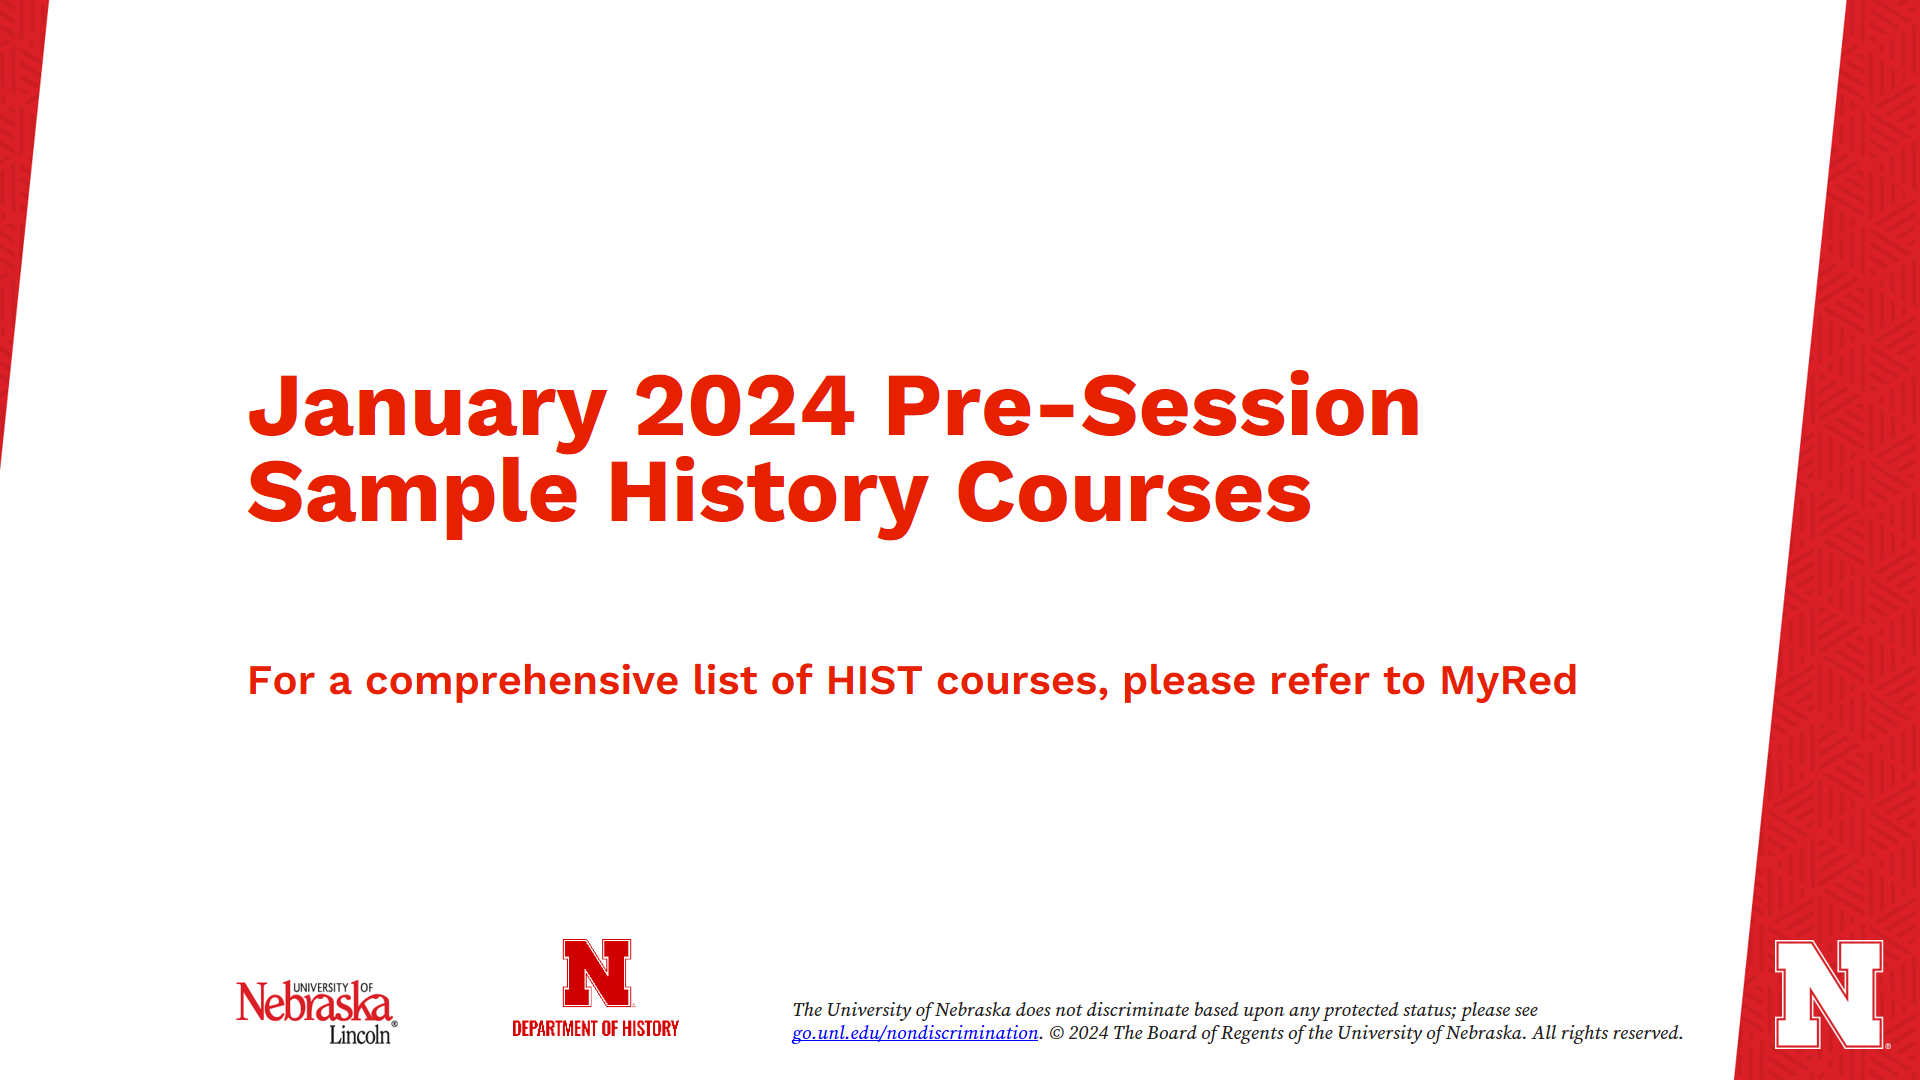 Sample Pre-Session Spring 2024 HIST Courses